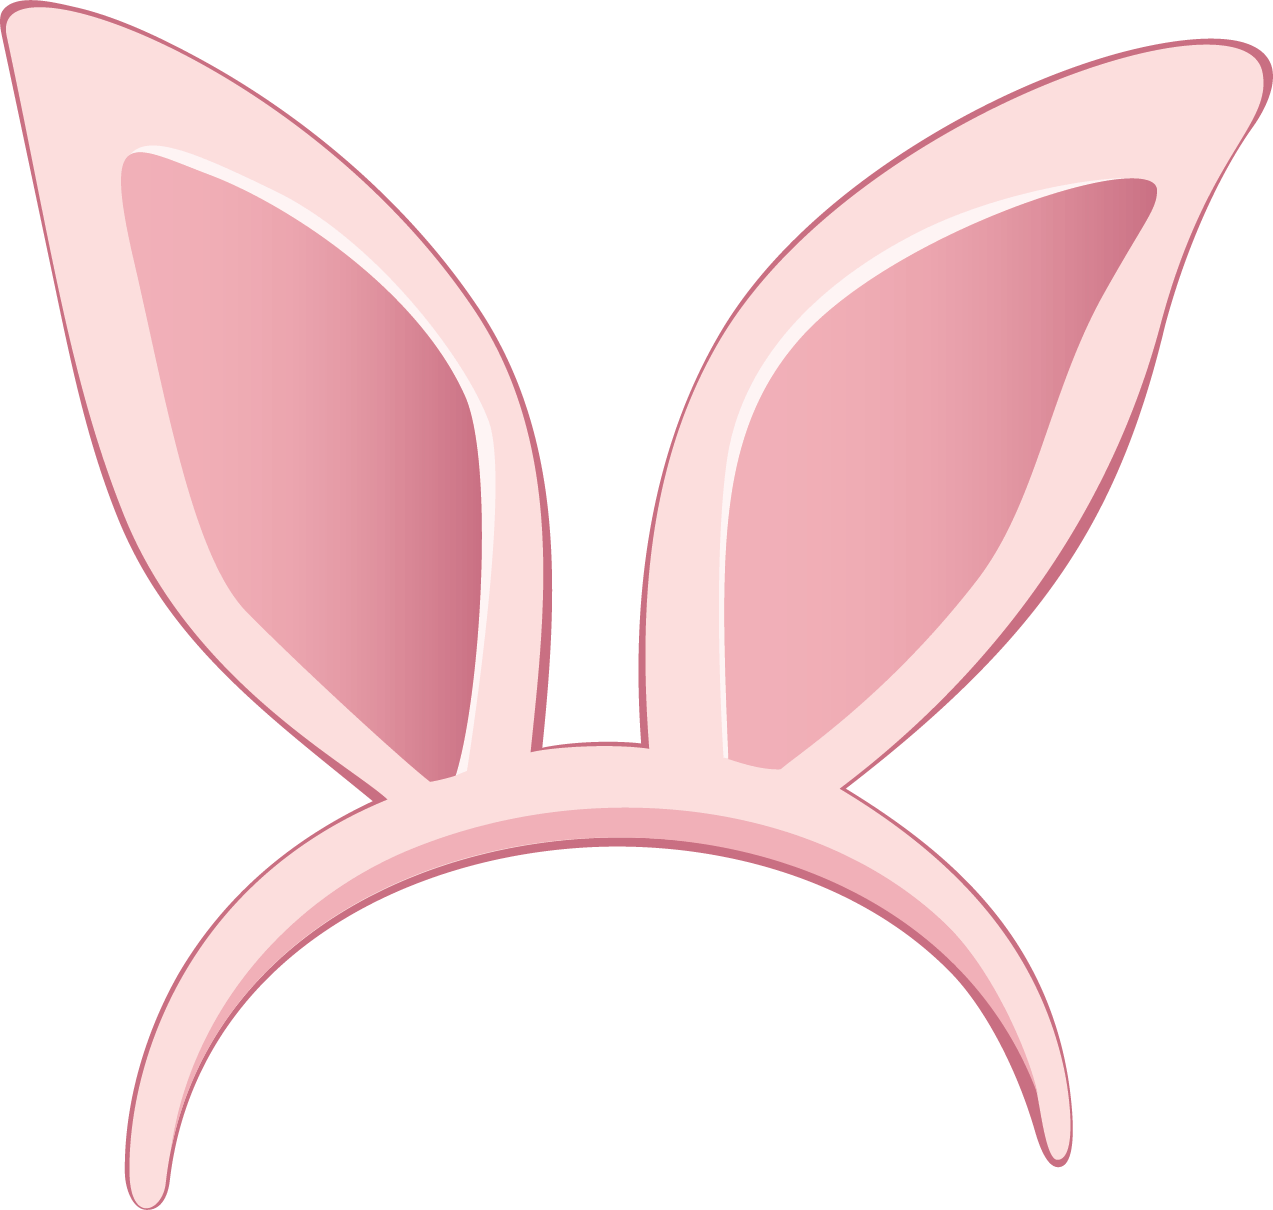 Clipart ear earring clipart. Rabbit ears drawing at